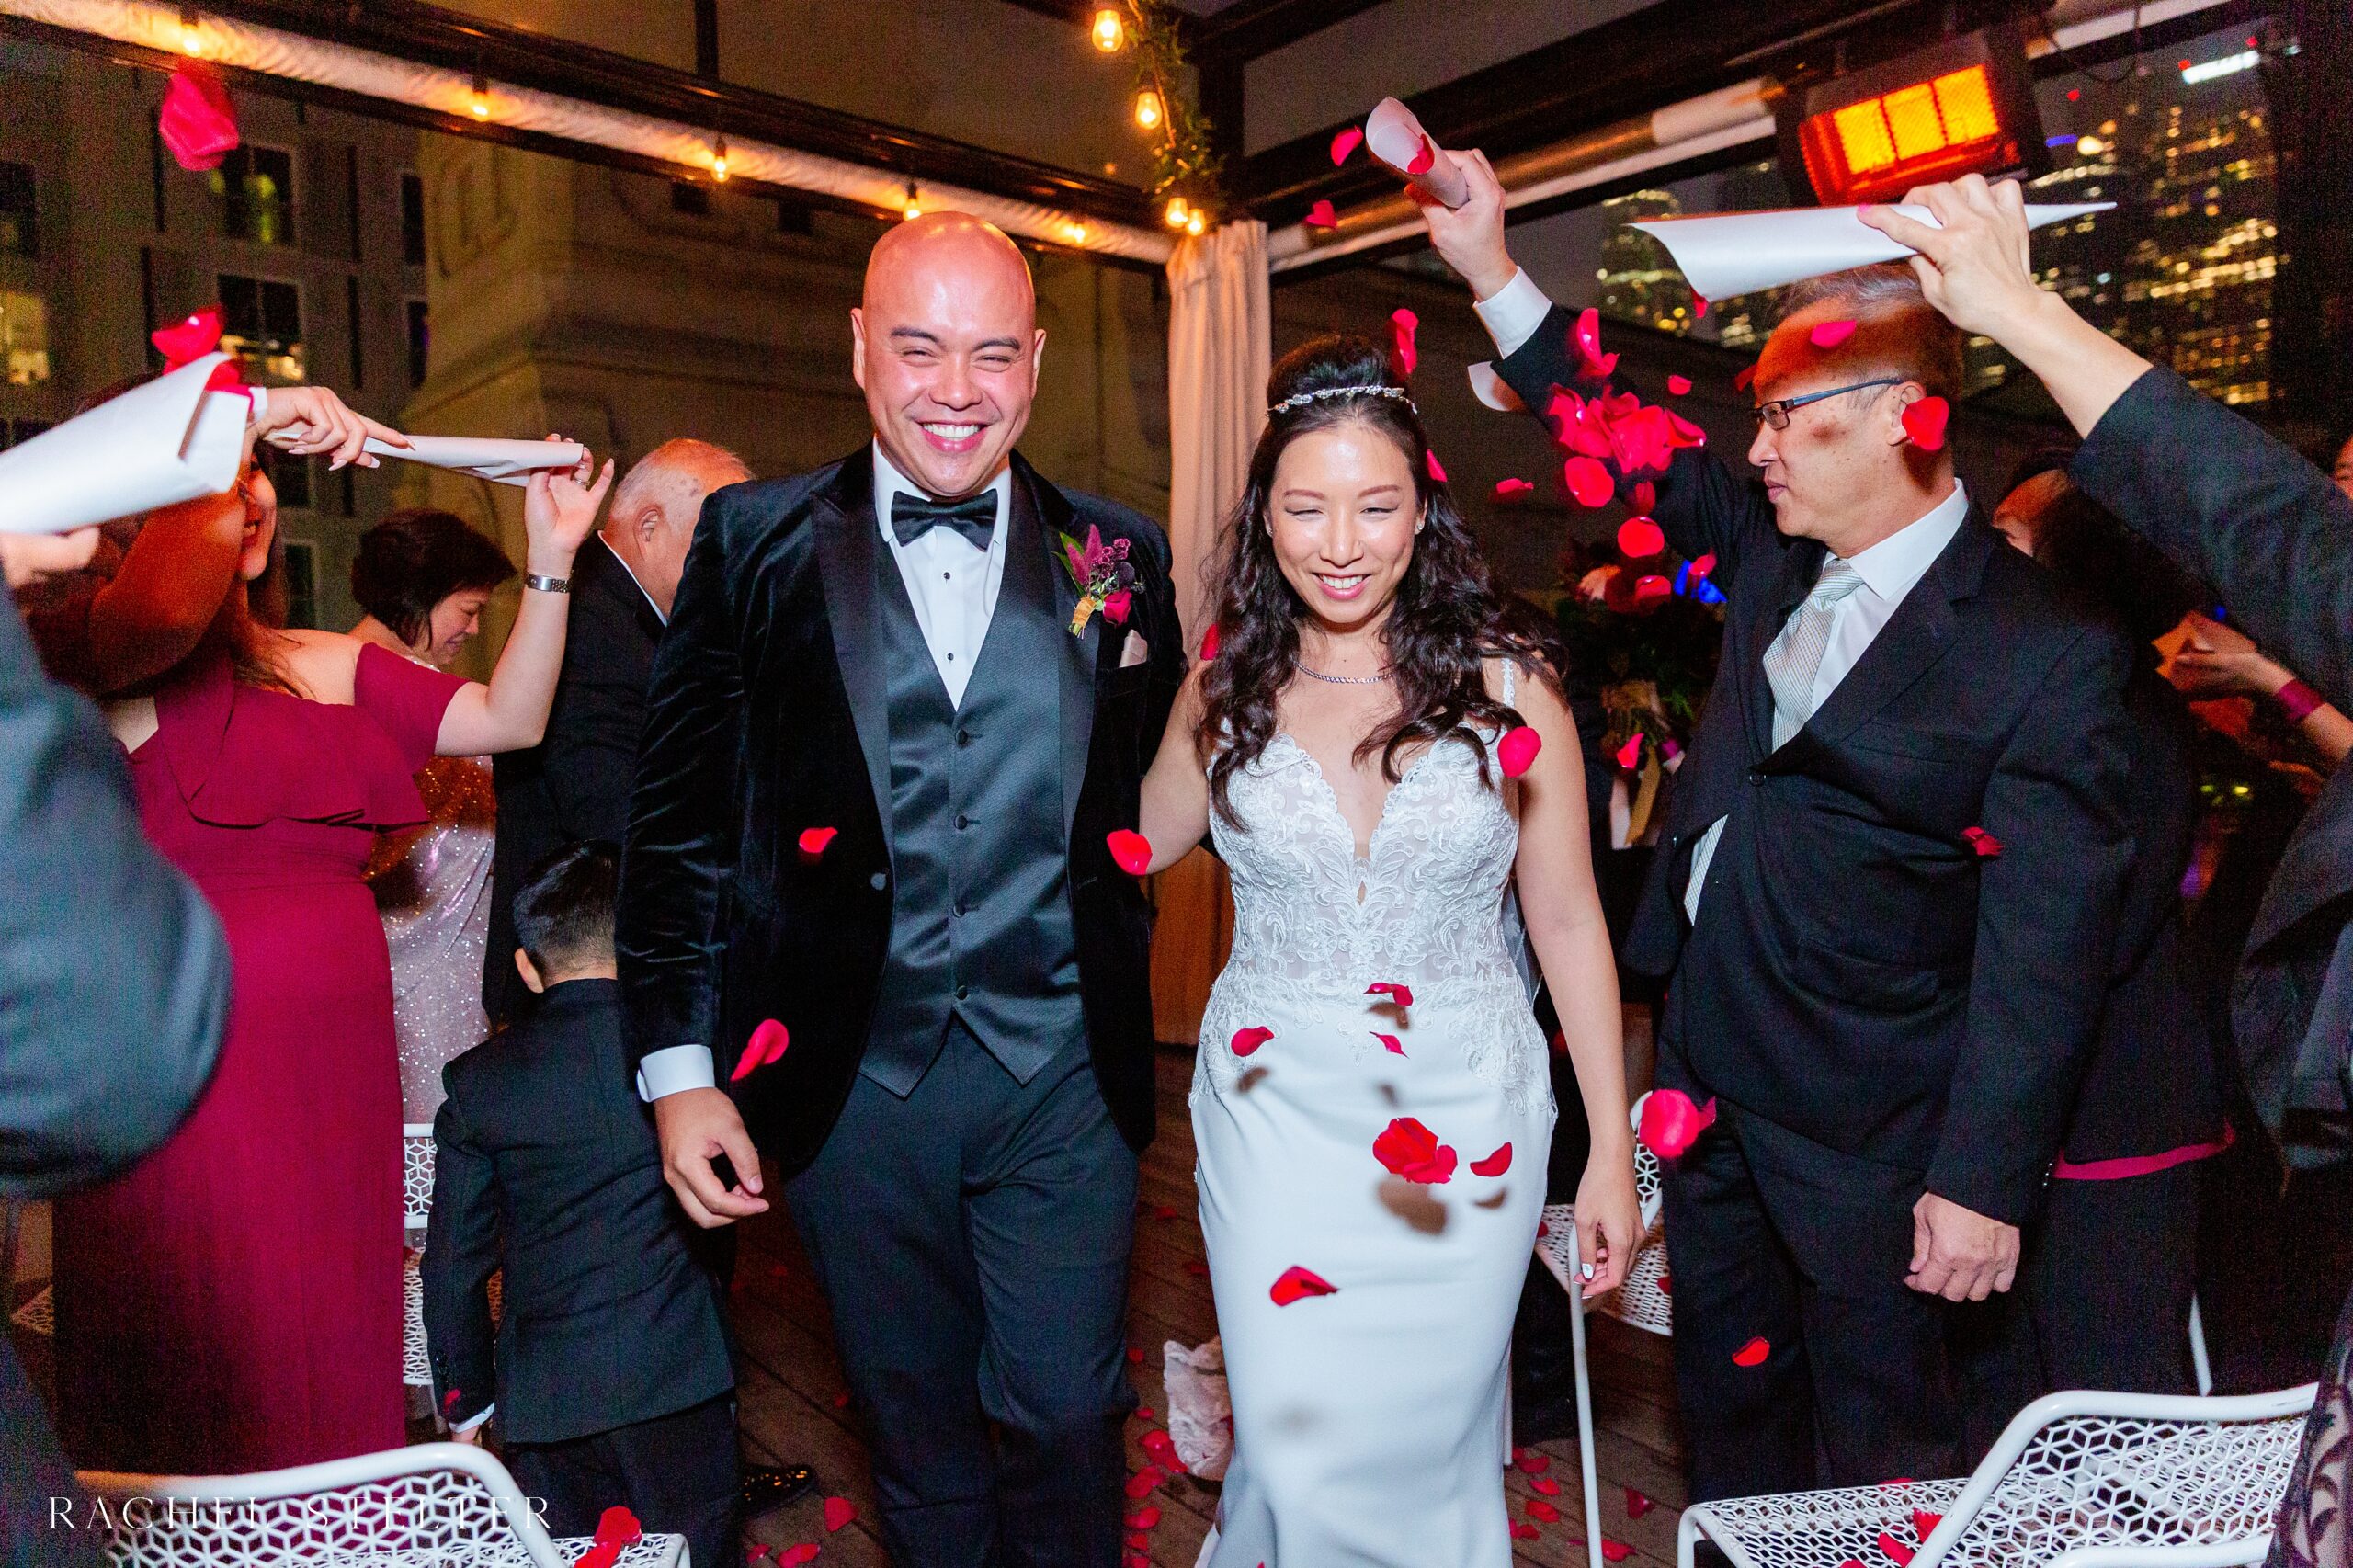 guests throw red rose petals at bride and groom